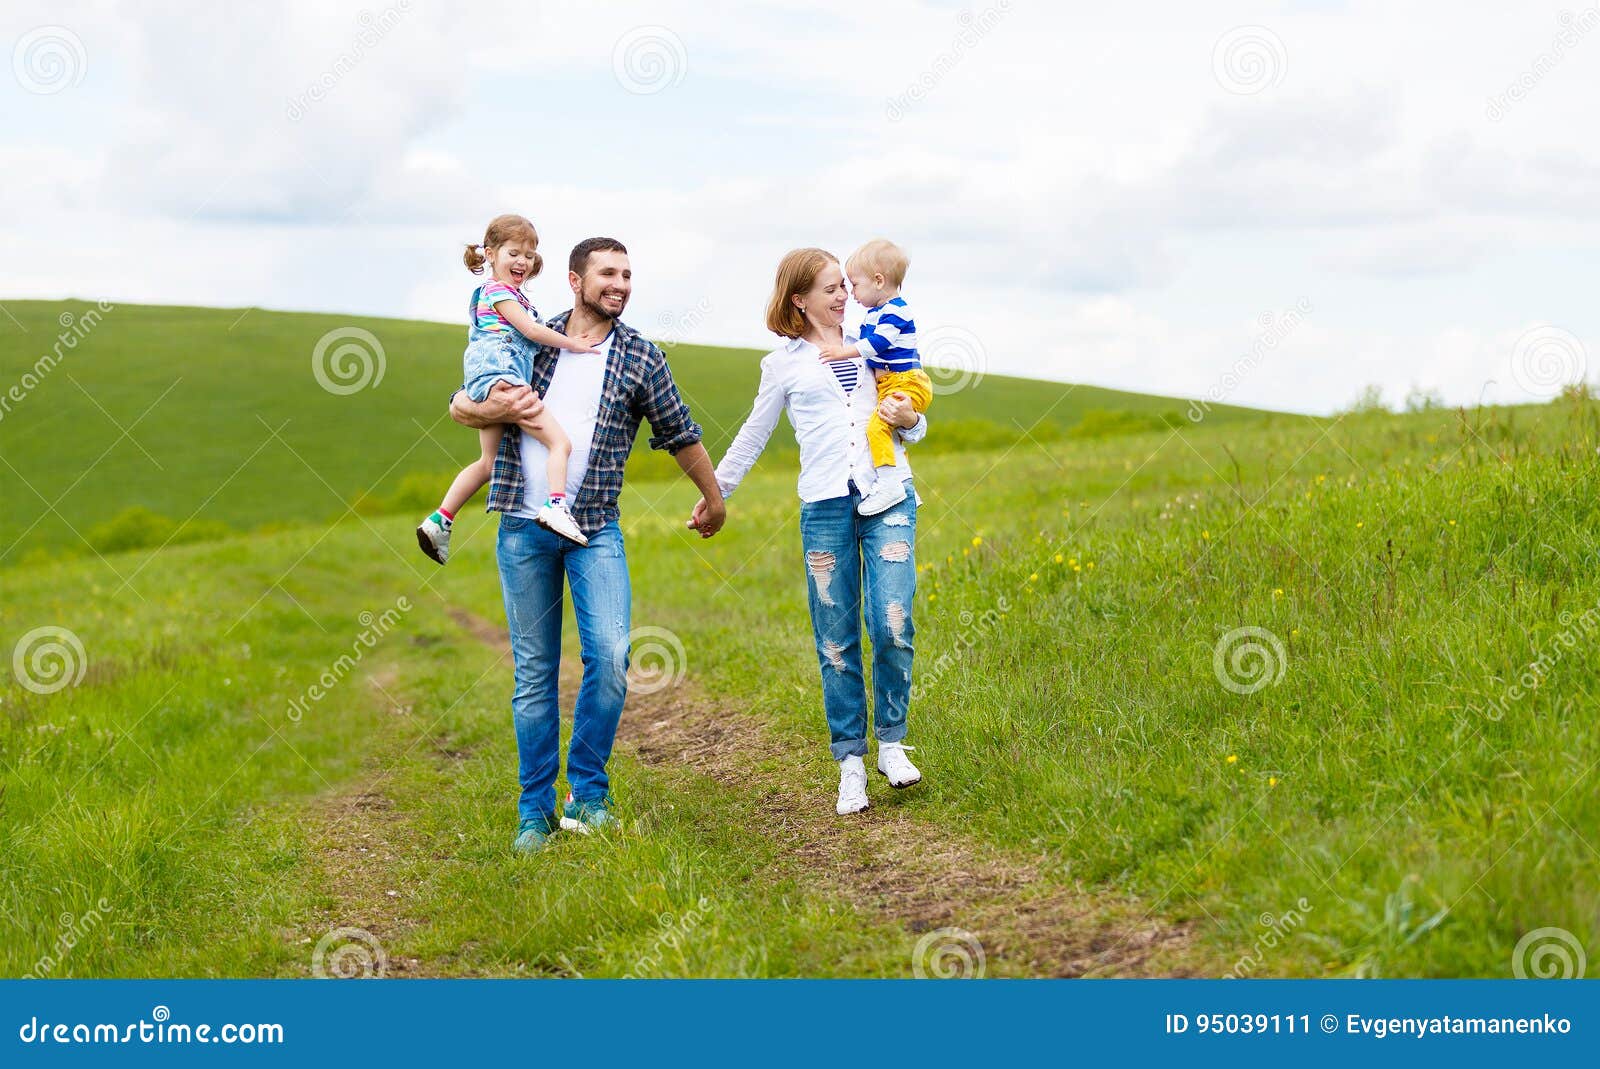 happy family: mother, father, children son and daughter on summer